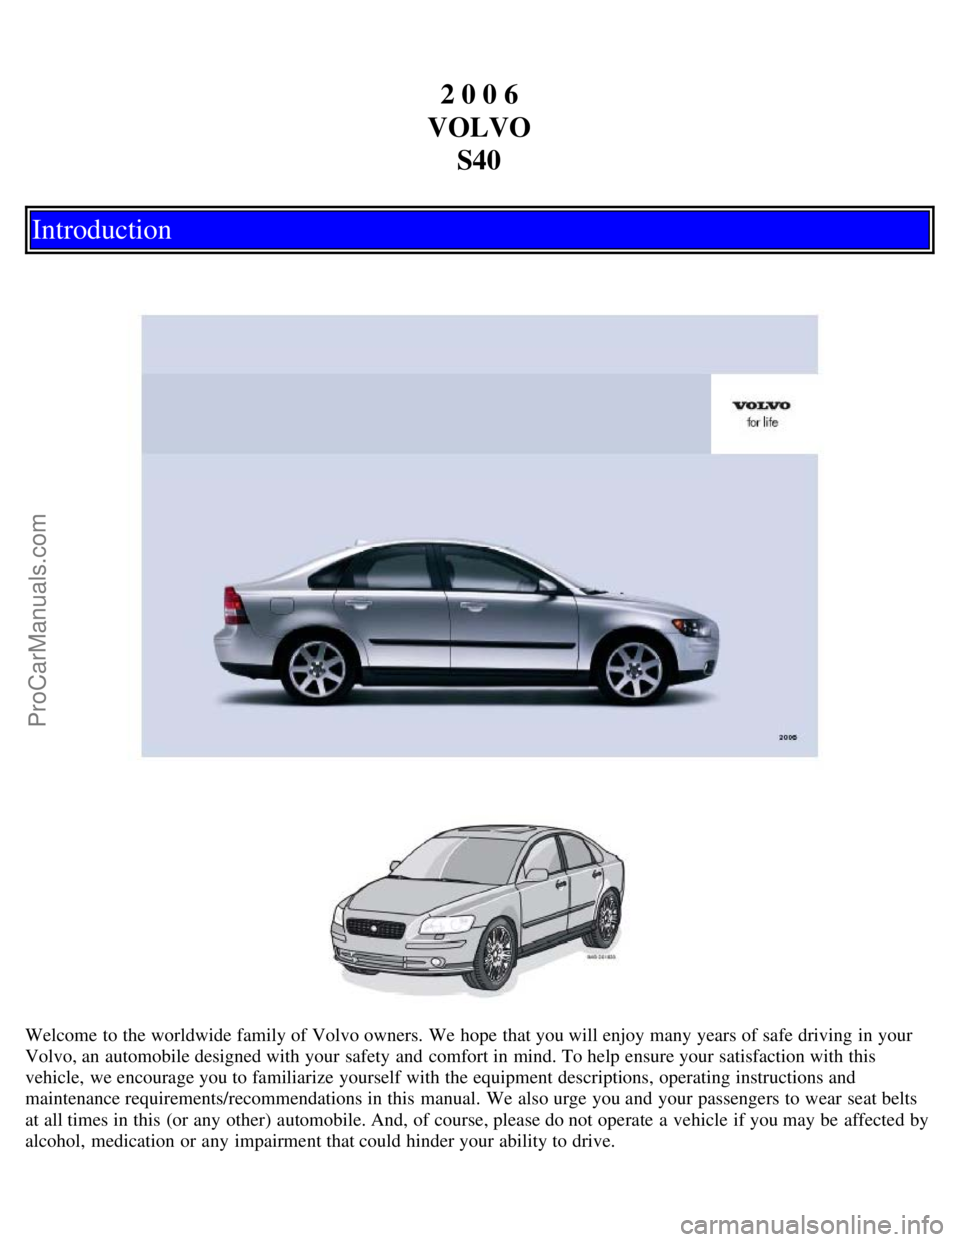 VOLVO S40 2006  Owners Manual 2 0 0 6
VOLVO S40
Introduction
Welcome to the worldwide family of Volvo owners. We hope  that you will enjoy many years of safe driving in your
Volvo, an  automobile designed with your safety and  com